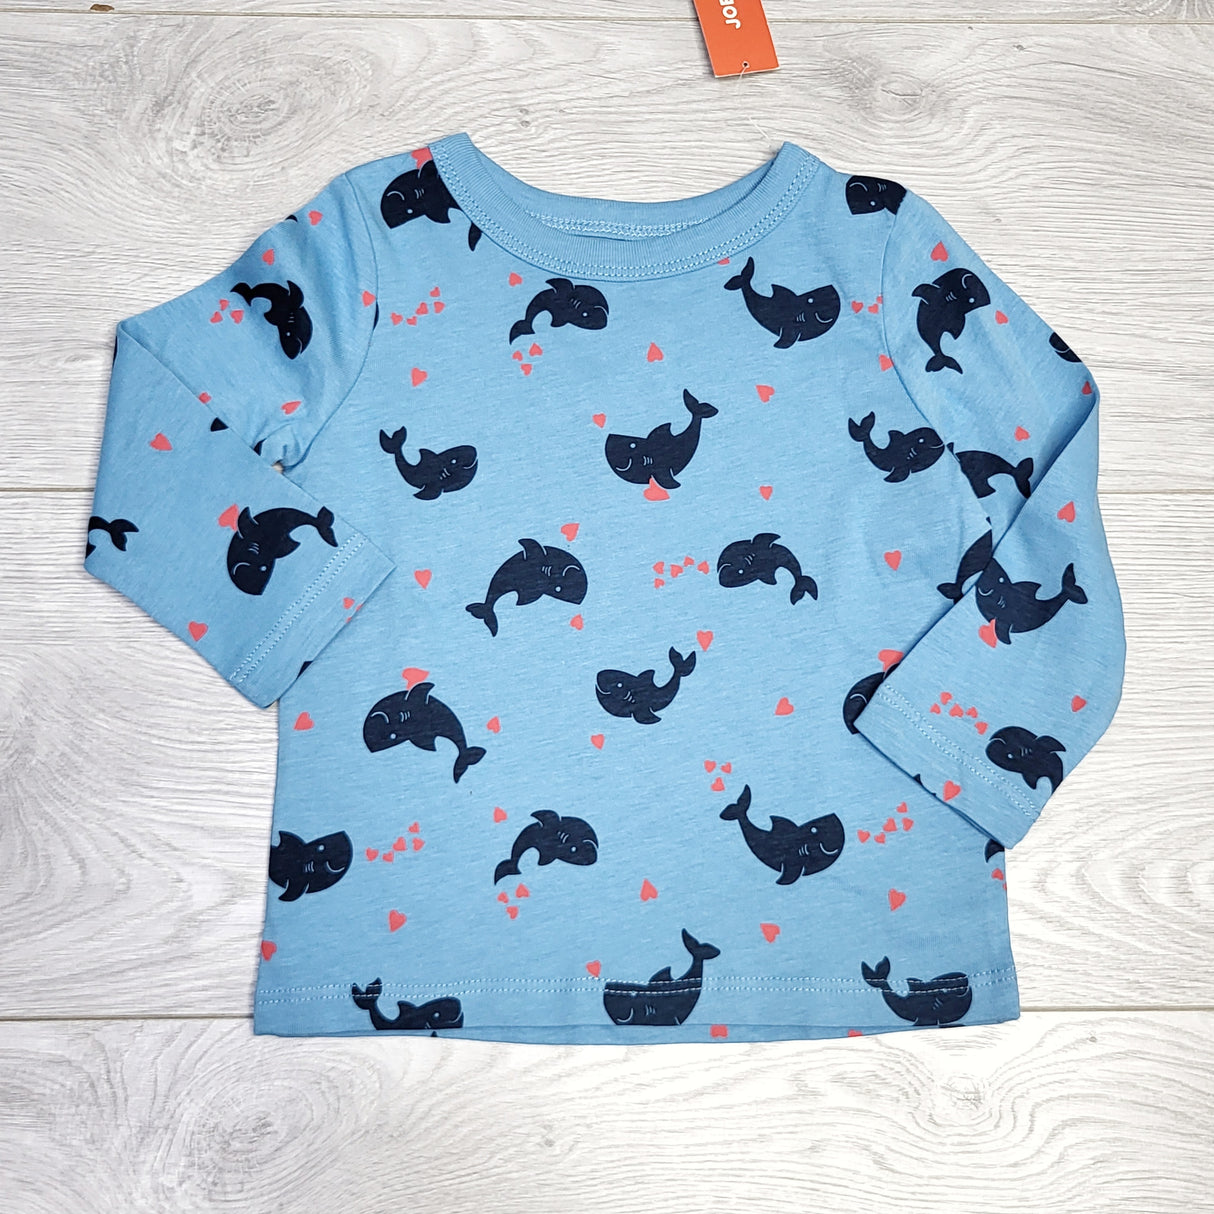 MSNDS11 - NEW - Joe blue long sleeved top with whales. Size 6-12 months